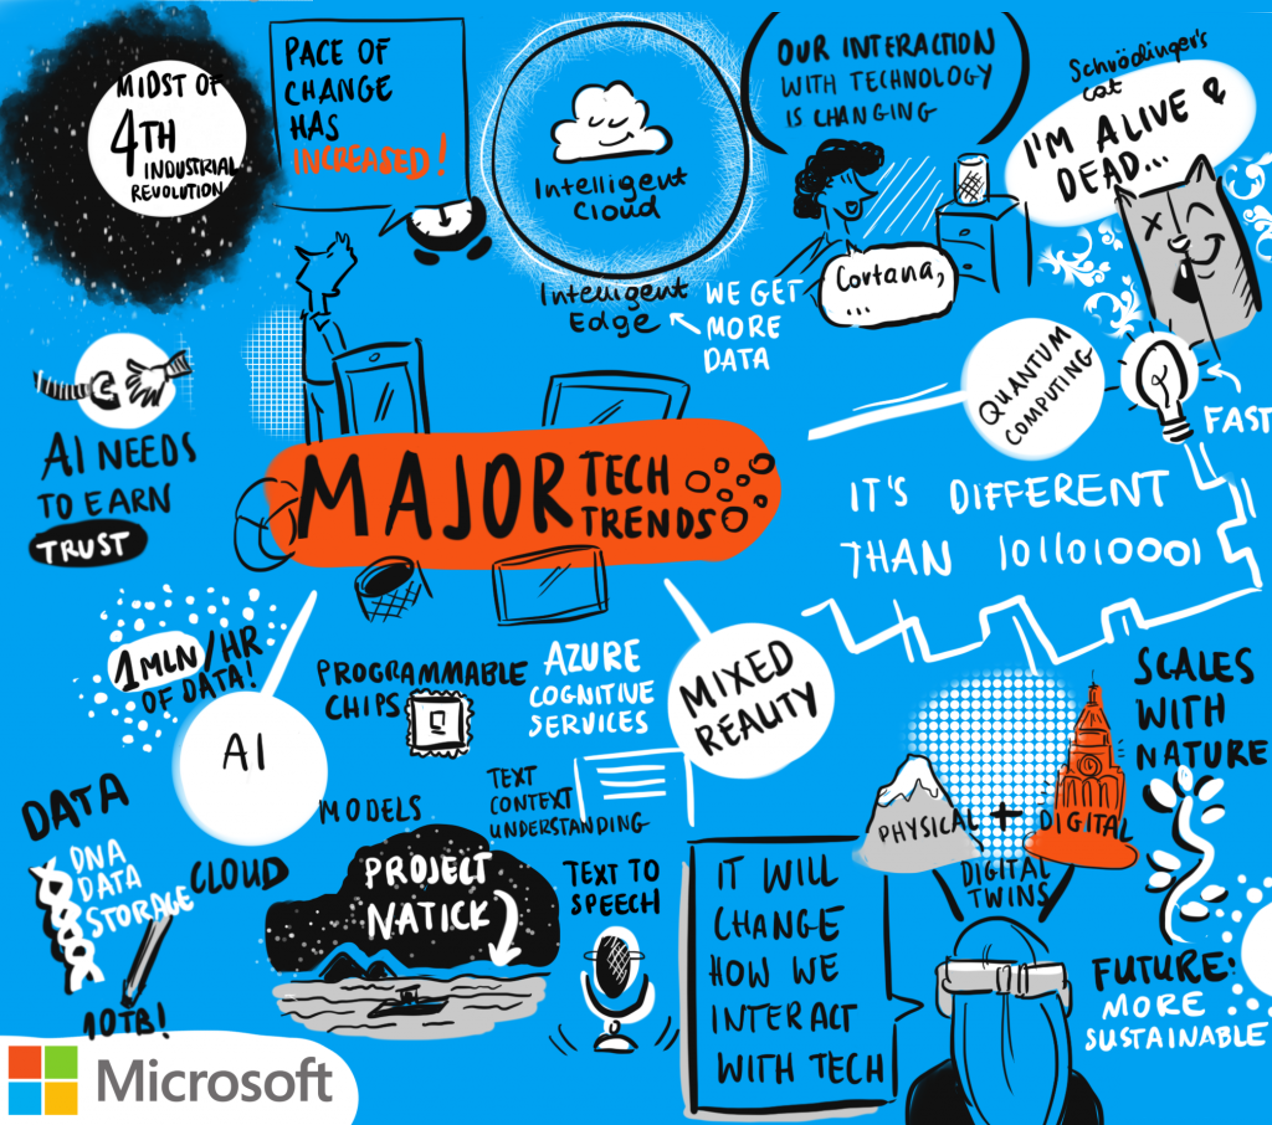 Sketch showing the major tech trends, including AI, mixed reality and quantum computing